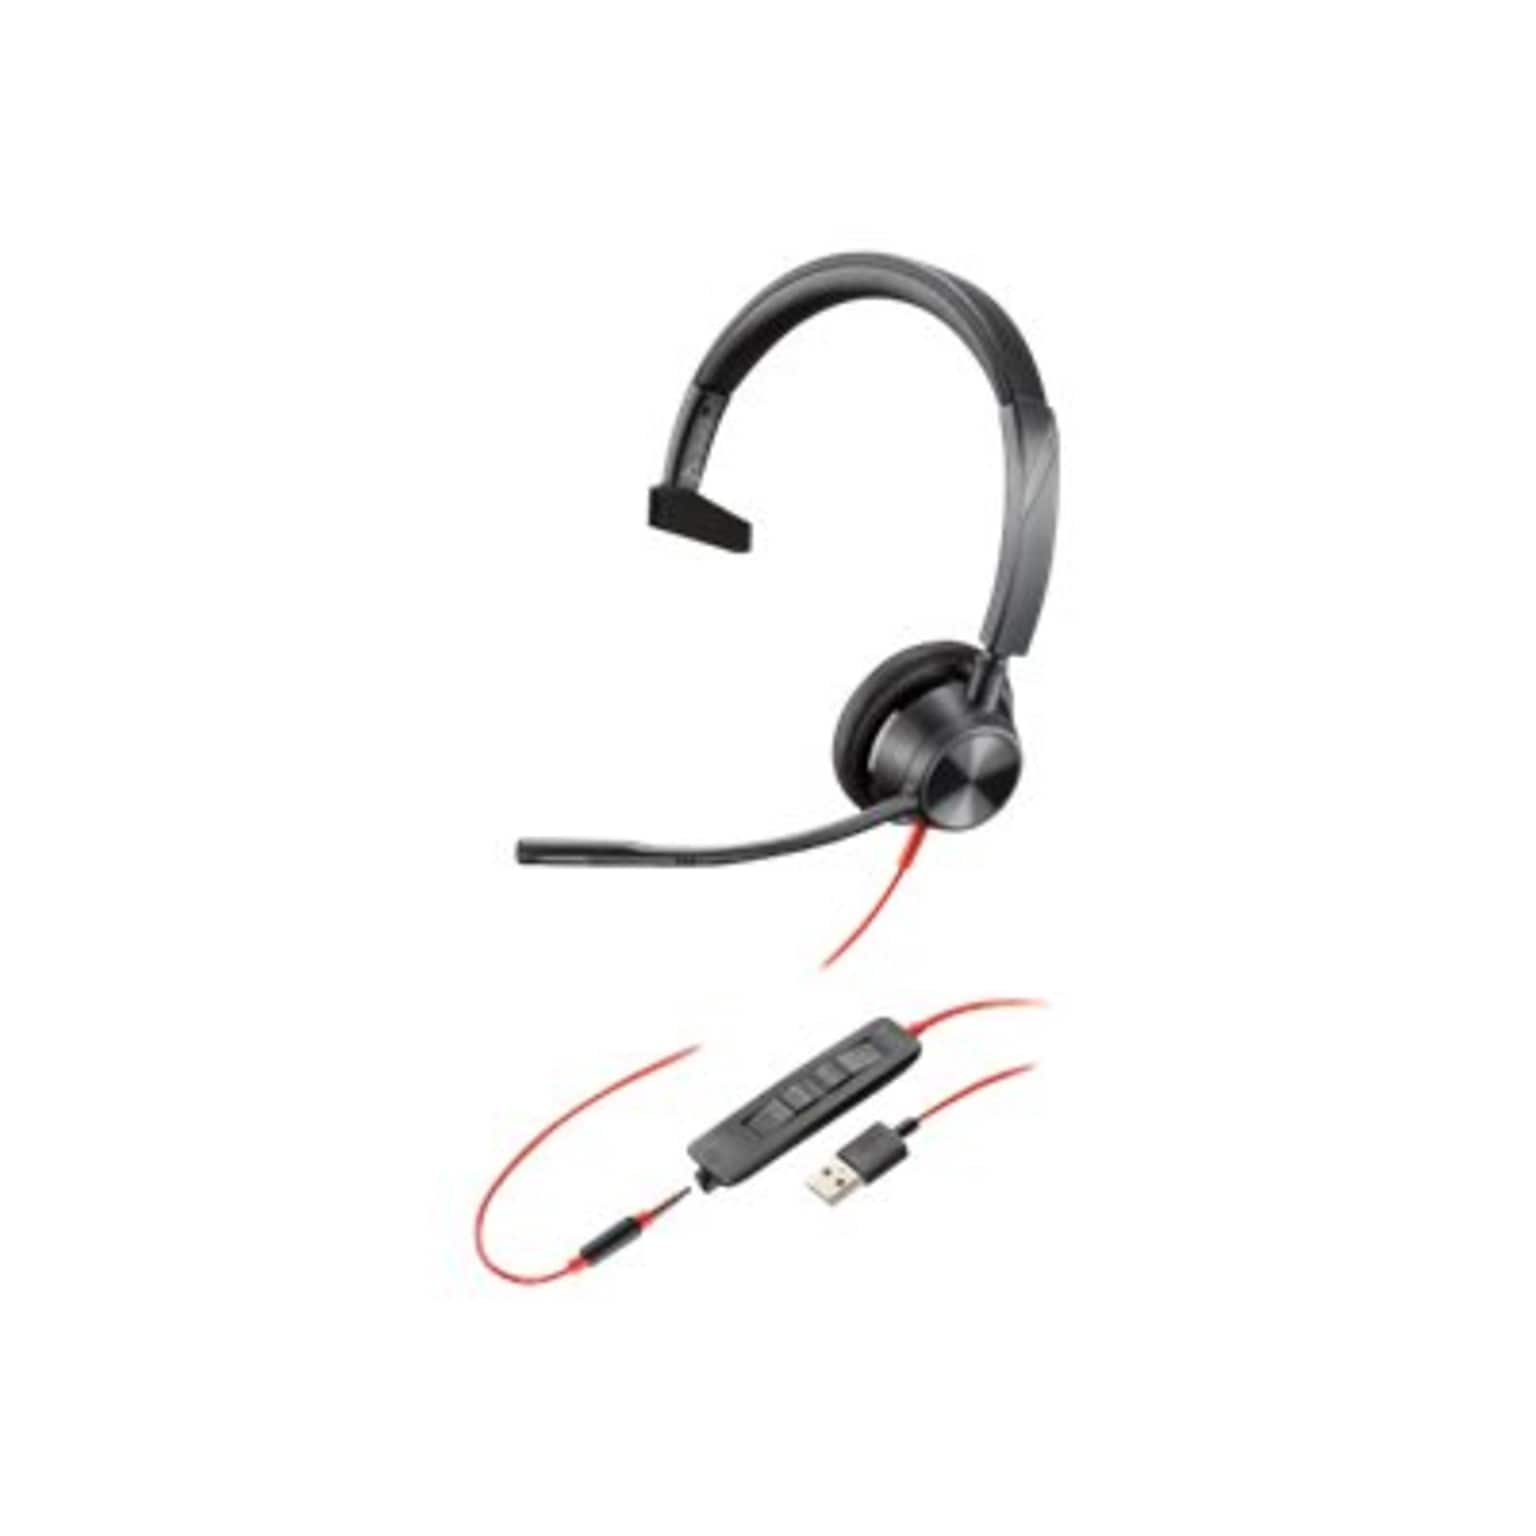 Plantronics Blackwire 3315 Wired Mono On Ear Computer Headset, Black (214014-01)